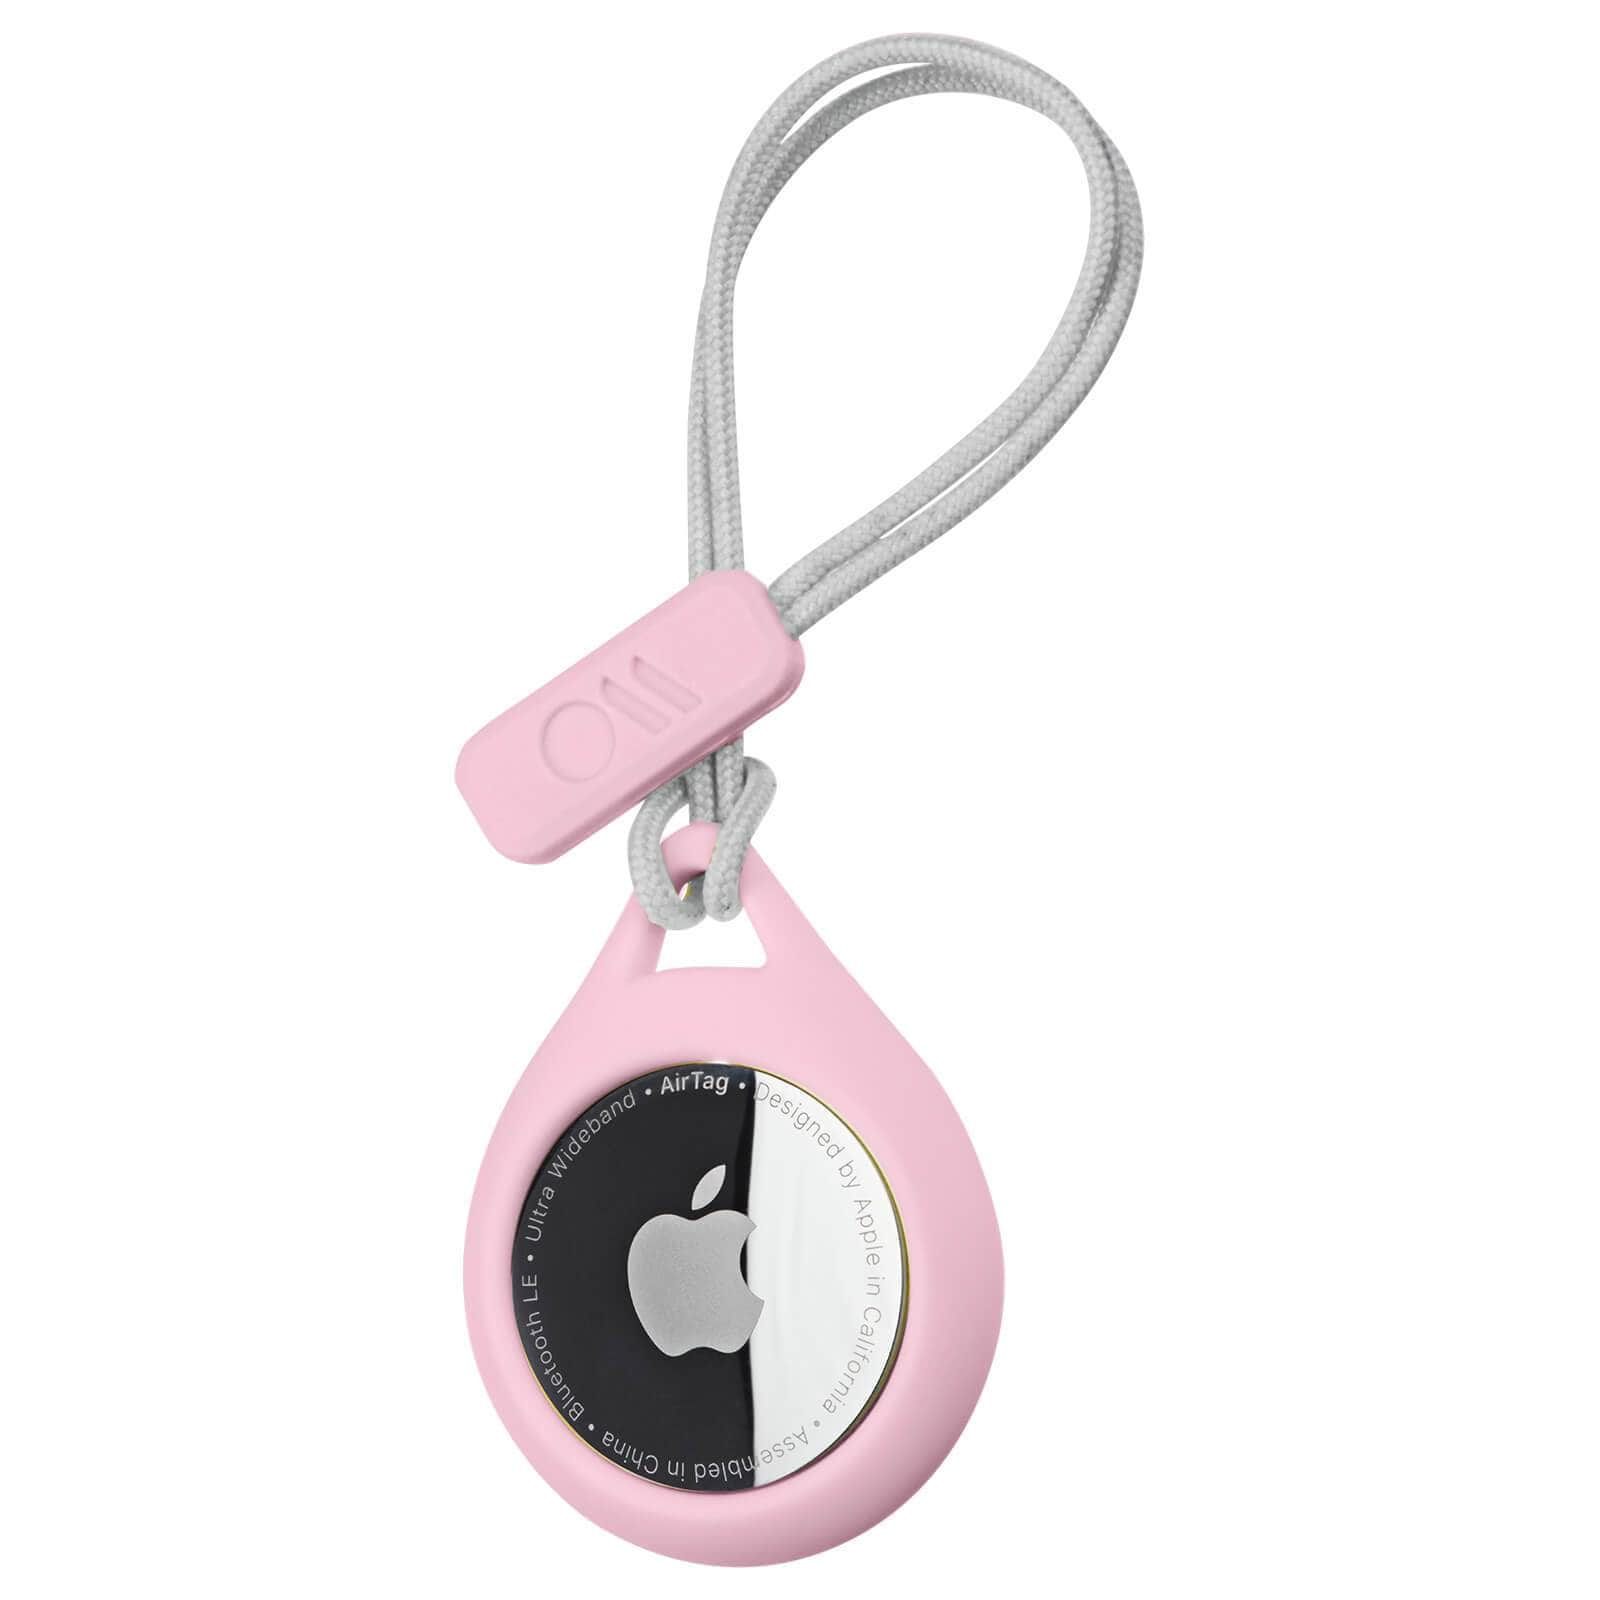 Case-Mate Keychain Case for AirTag